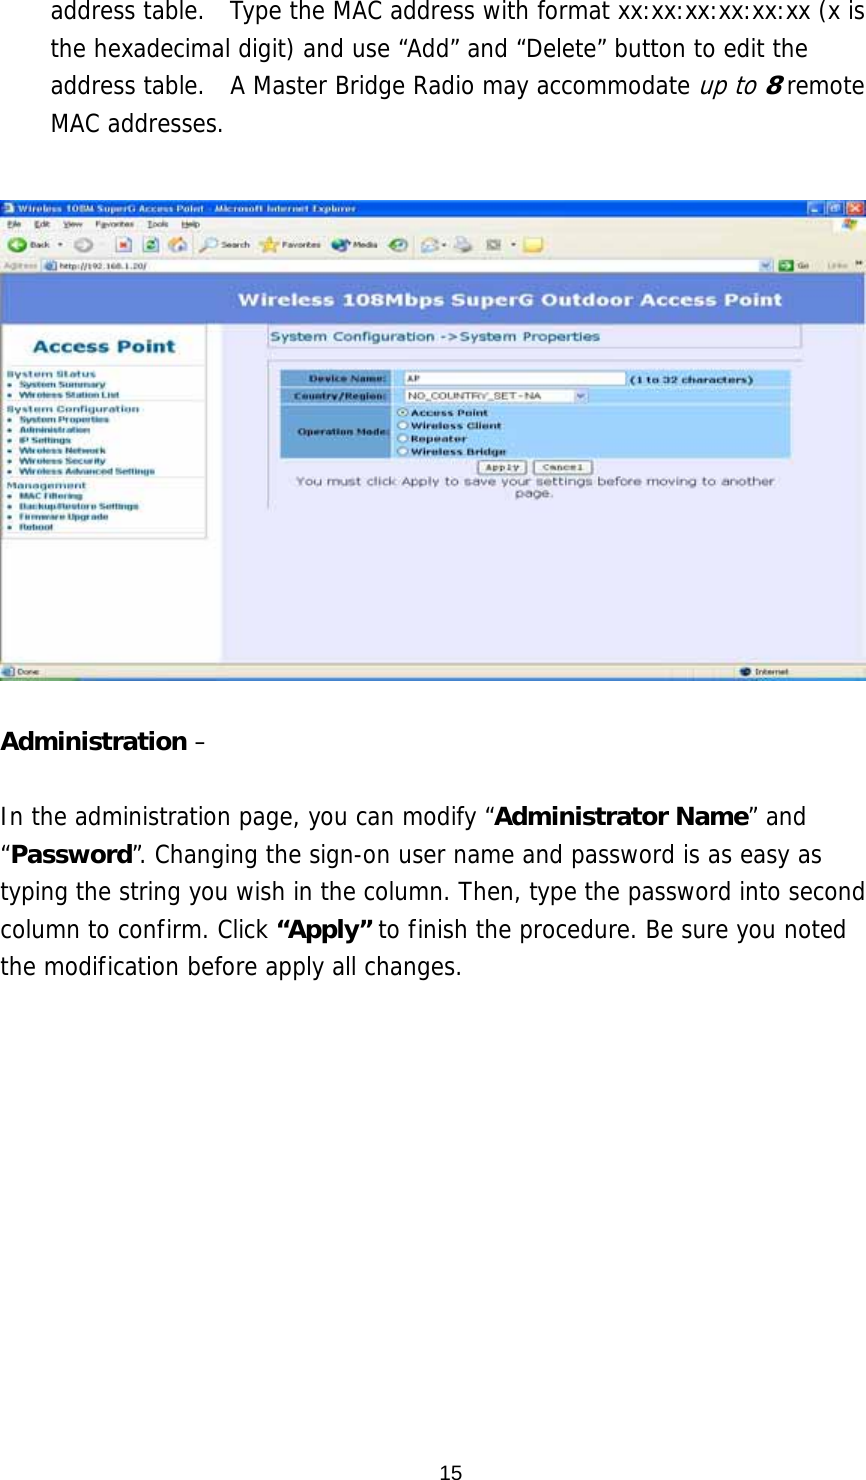  15address table.  Type the MAC address with format xx:xx:xx:xx:xx:xx (x is the hexadecimal digit) and use “Add” and “Delete” button to edit the address table.  A Master Bridge Radio may accommodate up to 8 remote MAC addresses.    Administration –   In the administration page, you can modify “Administrator Name” and “Password”. Changing the sign-on user name and password is as easy as typing the string you wish in the column. Then, type the password into second column to confirm. Click “Apply” to finish the procedure. Be sure you noted the modification before apply all changes.   